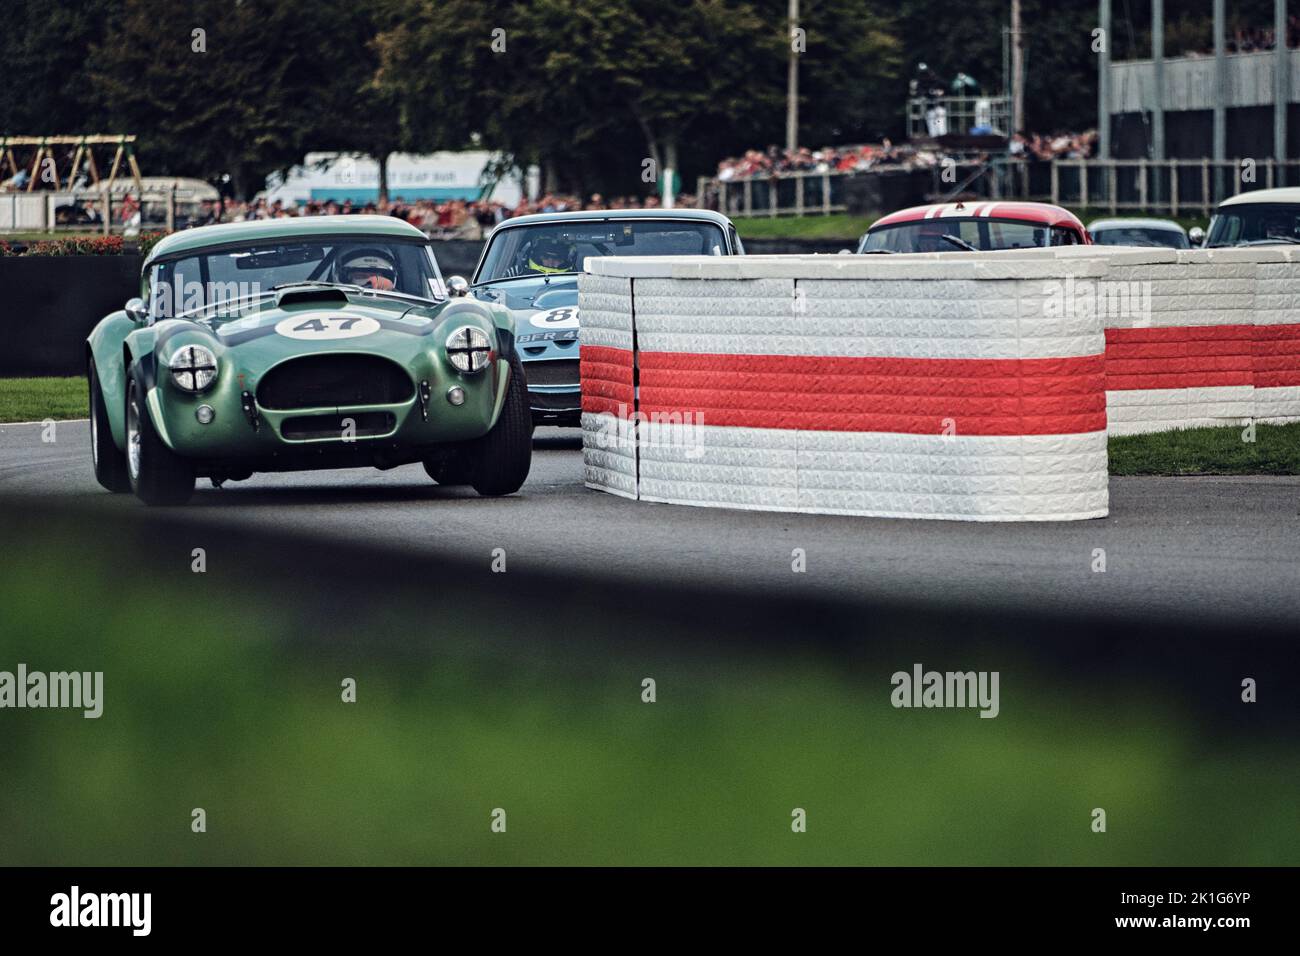 Goodwood, Chichester, UK. 18th Sept, 2022. Royal Automobile Club TT Celebration driver Romain Dumas / Bill Sheperd drives during the 2022 Goodwood Revival (Photo by Gergo Toth / Alamy Live News) Stock Photo